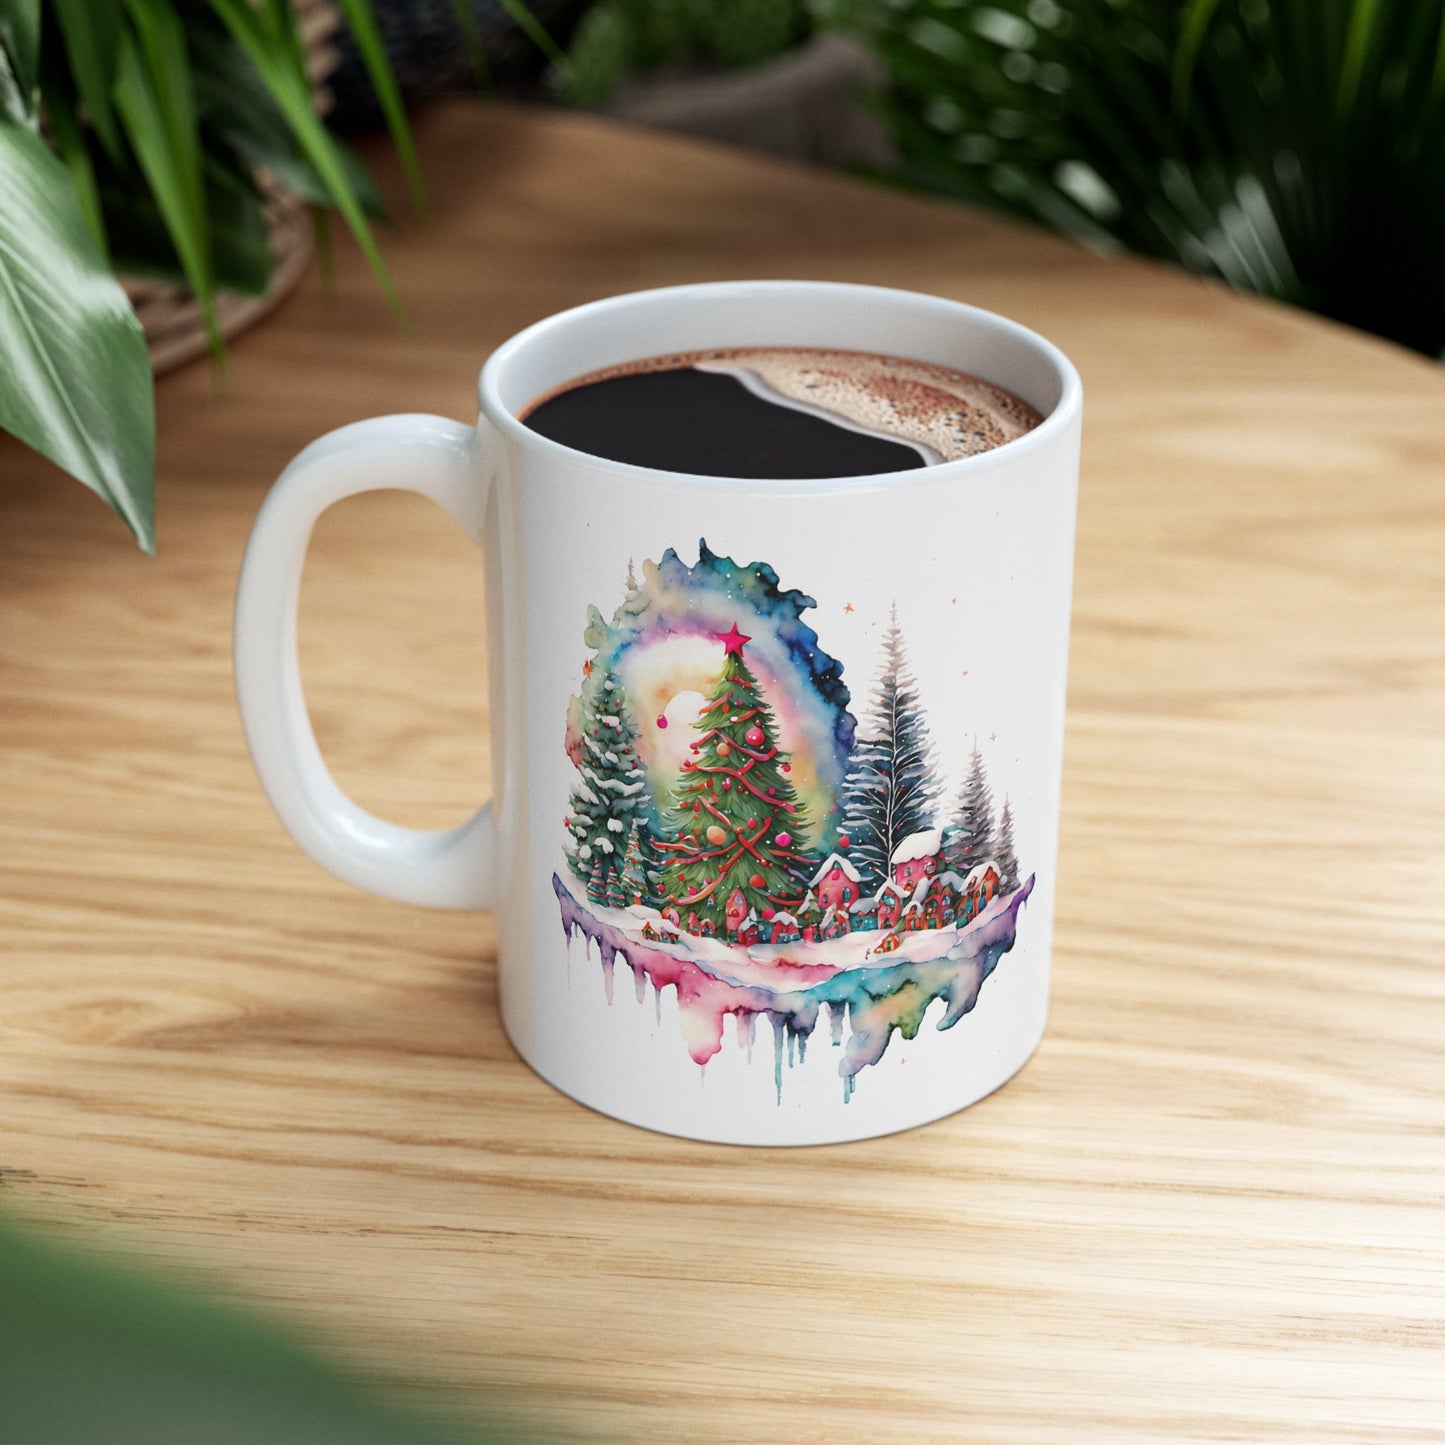 The Floating Christmas Tree Scenery Mug Makes the Perfect Gift for Friends, Family, Coworkers or yourself.  Check Out My Shop for even more Great Designs.
www.scorpiontees.etsy.com